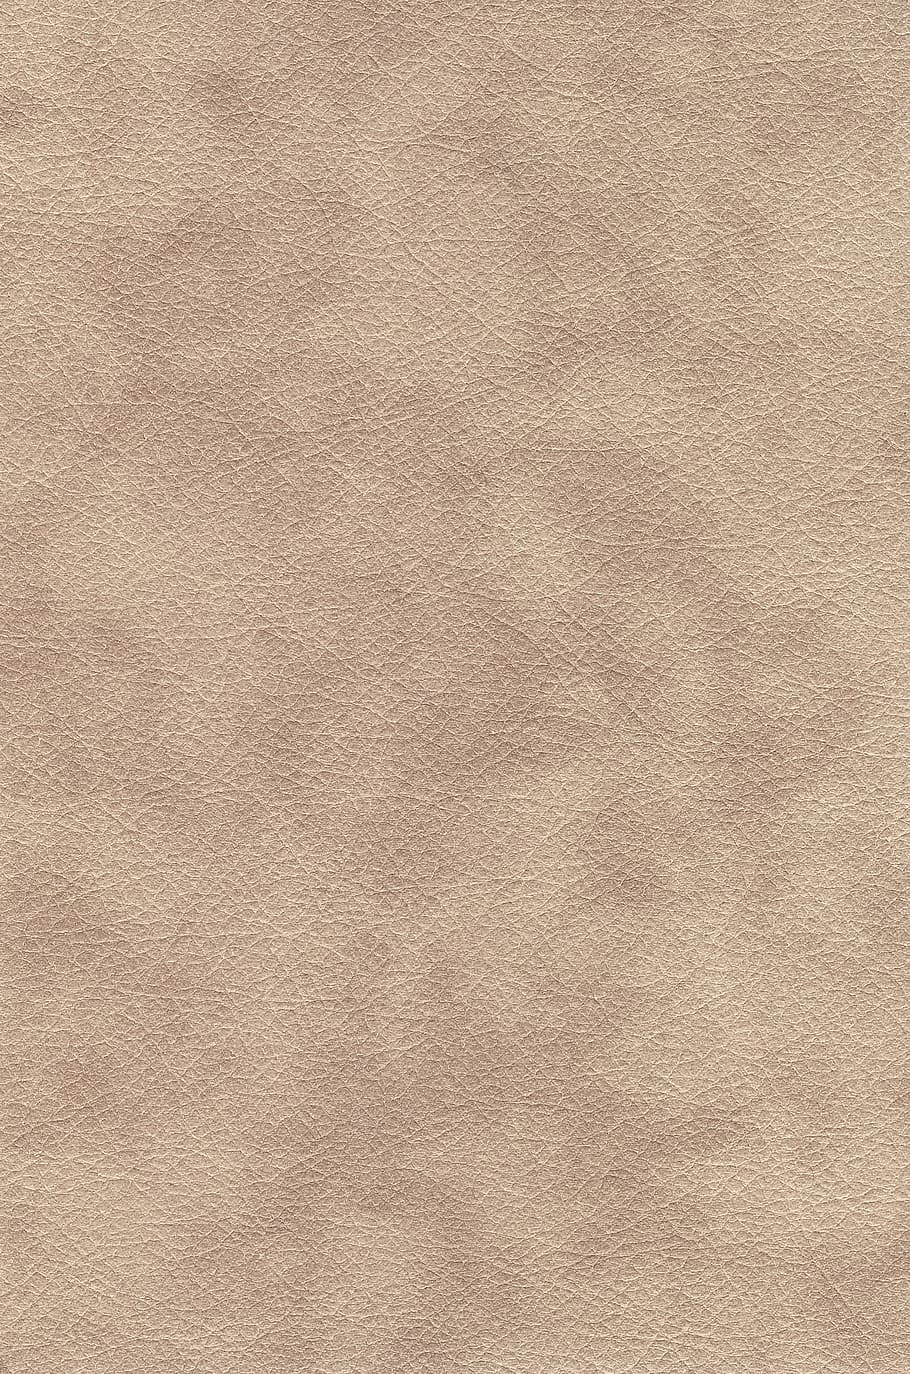 gray carpet, leather, textures, background, fabric, raw, decor, HD wallpaper